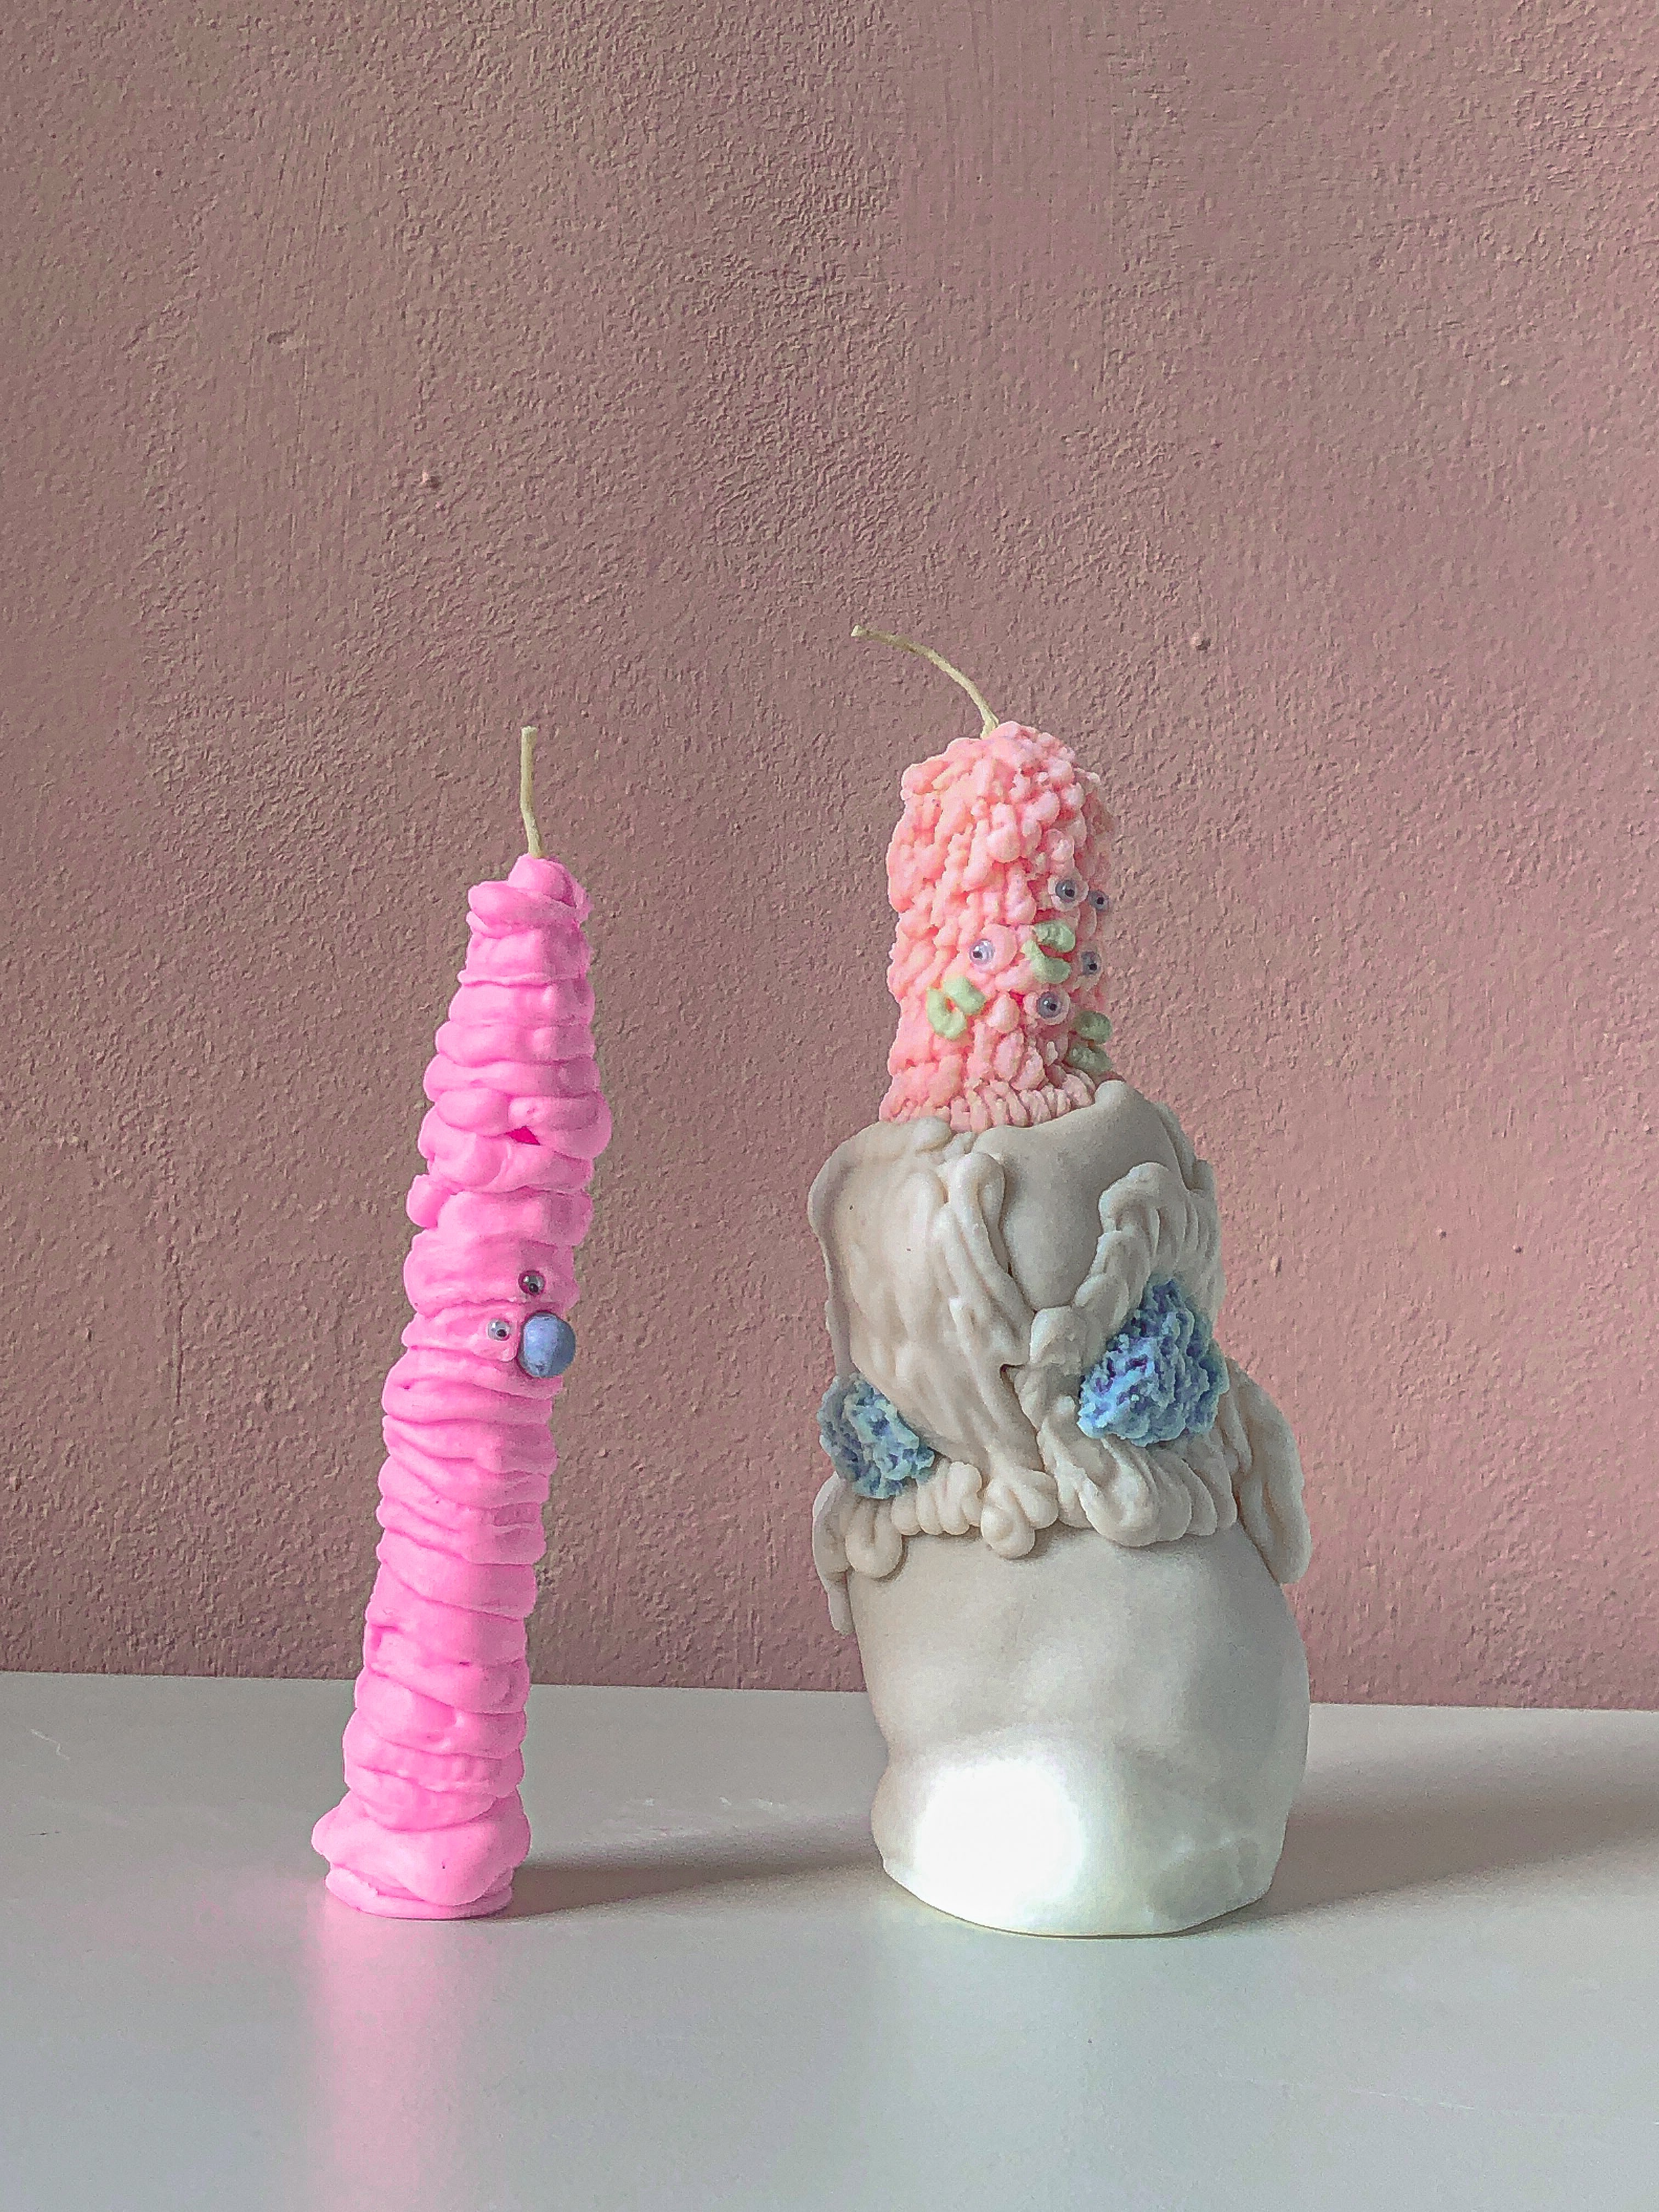 Brain Monster Candle by nag.19